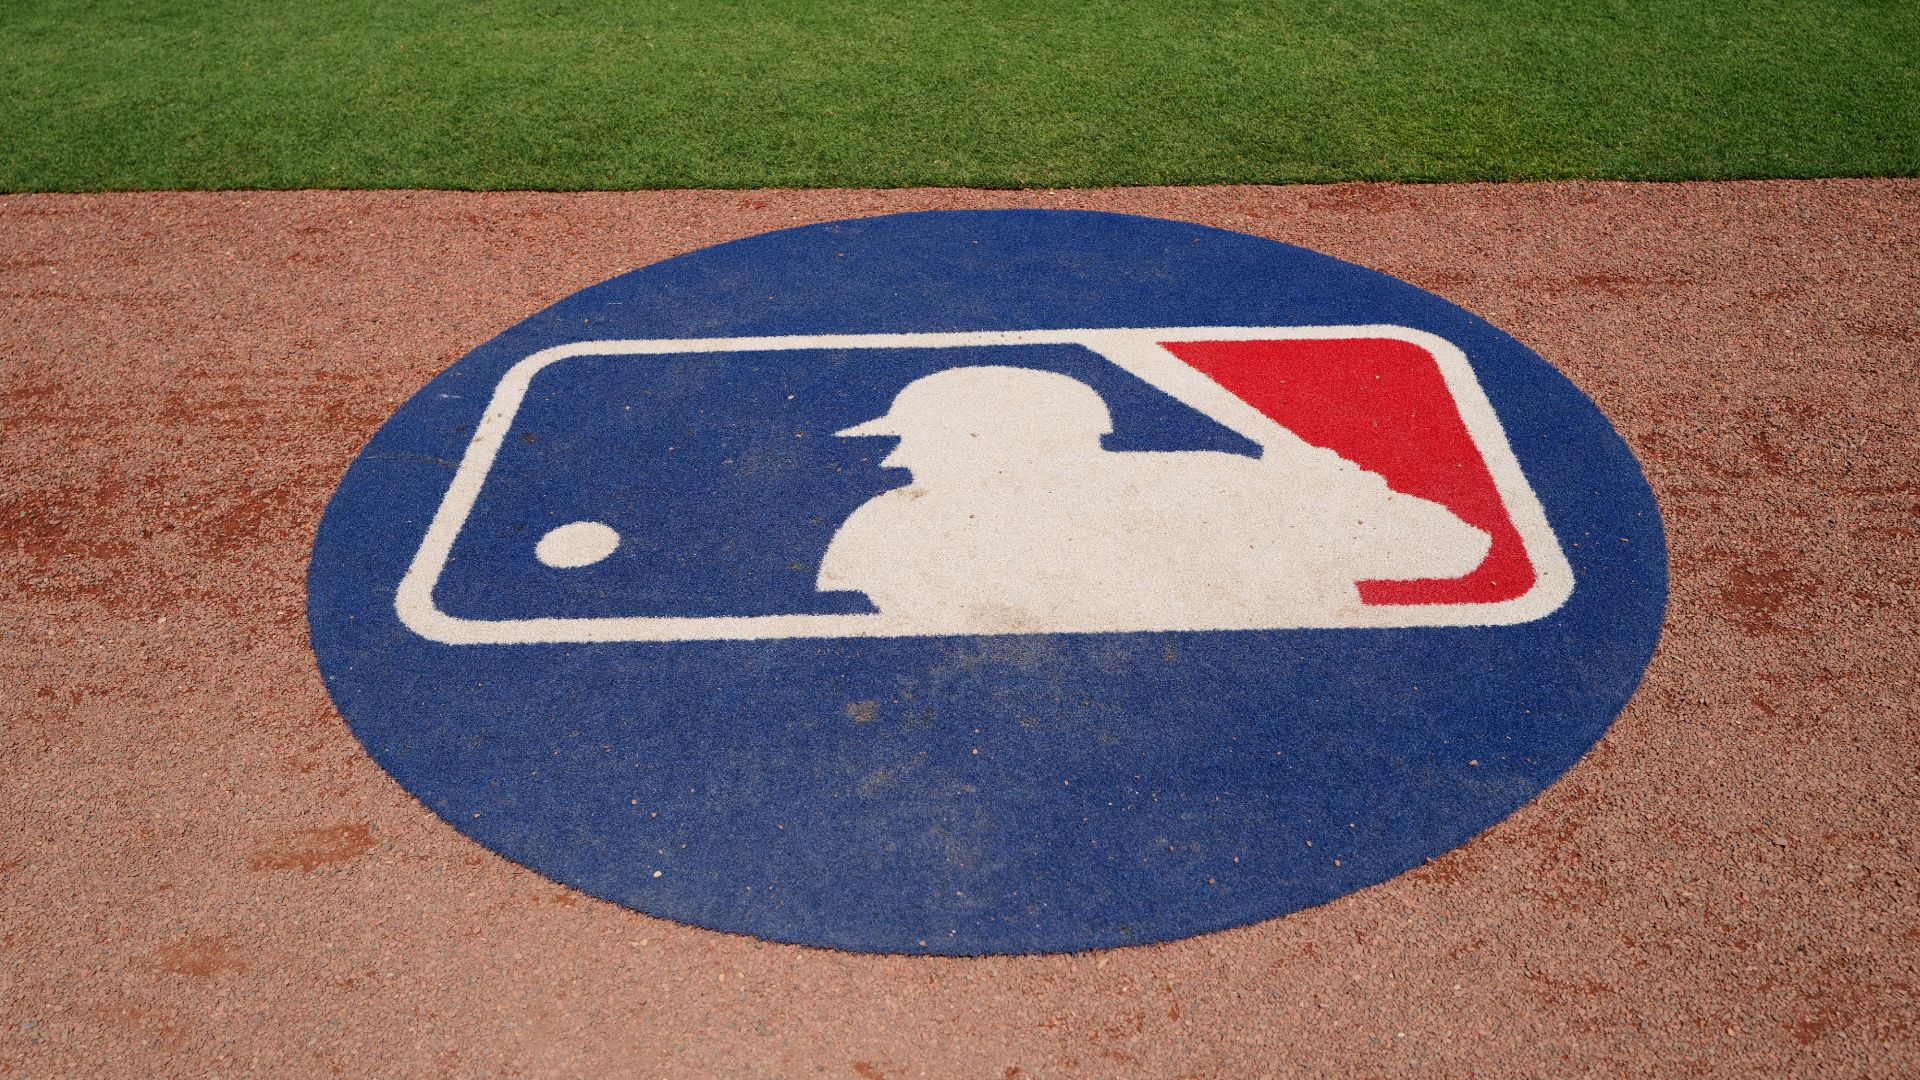 Rangers-Padres MLB 2023 live stream (7/30): How to watch online